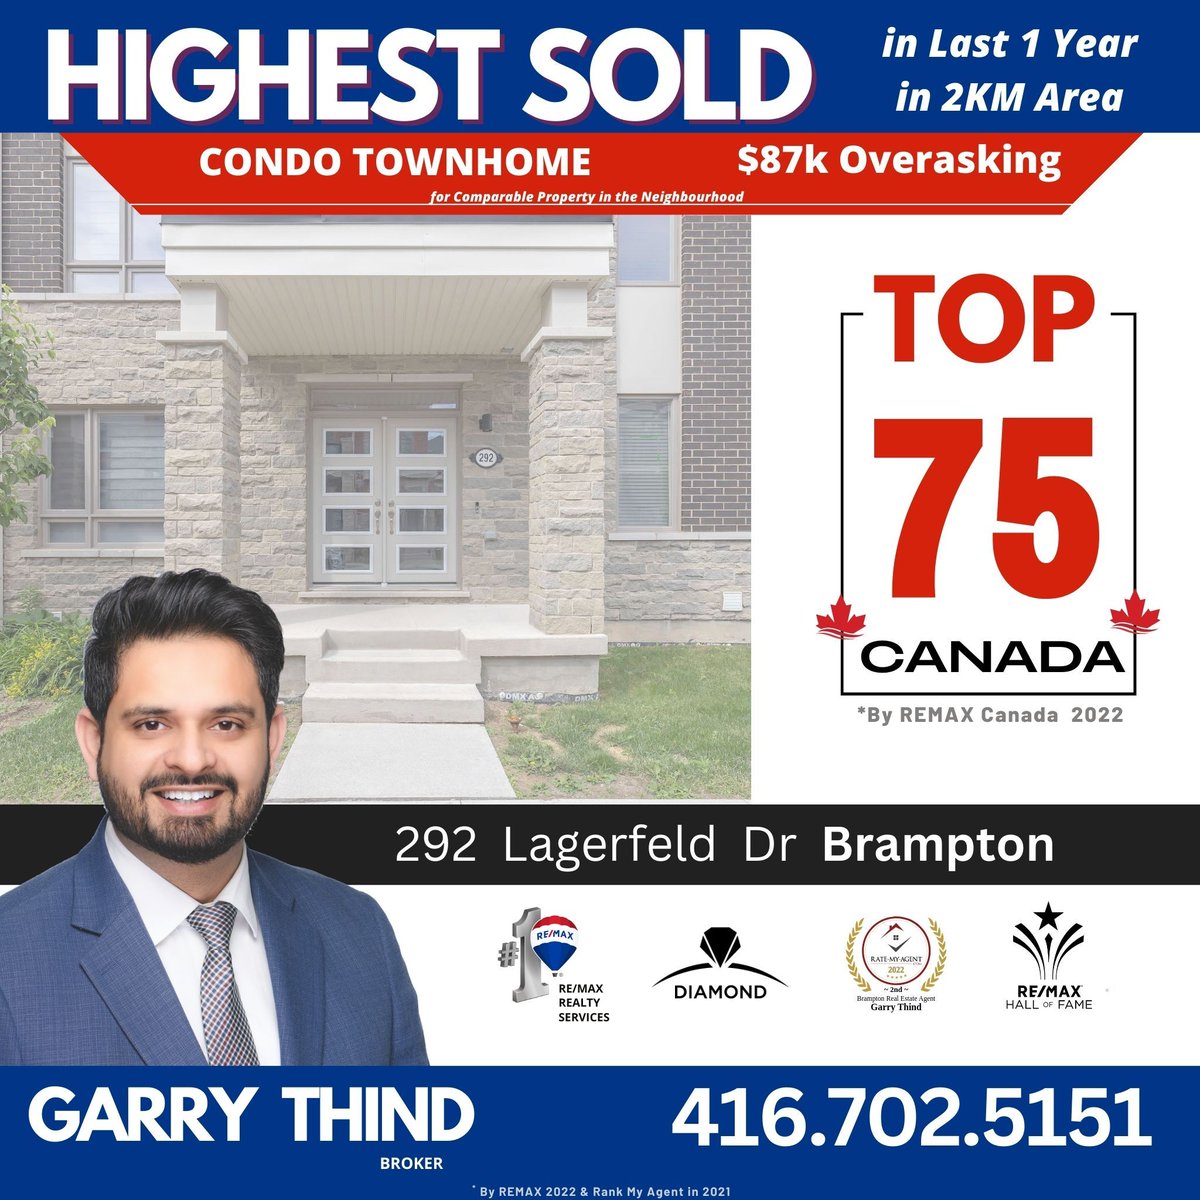 Highest Sold Condo Townhome in Last 1 Year in 2Km Area. Thinking of Selling!! Call us at 416-702-5151

#sellersagent #viral #toronto #brampton #realtor #canada #GarryThind  #teamgarry #myhouse  #milliondollaragent #realtorgarrythind #toprealtor #listwithgarry #bestrealestateagent